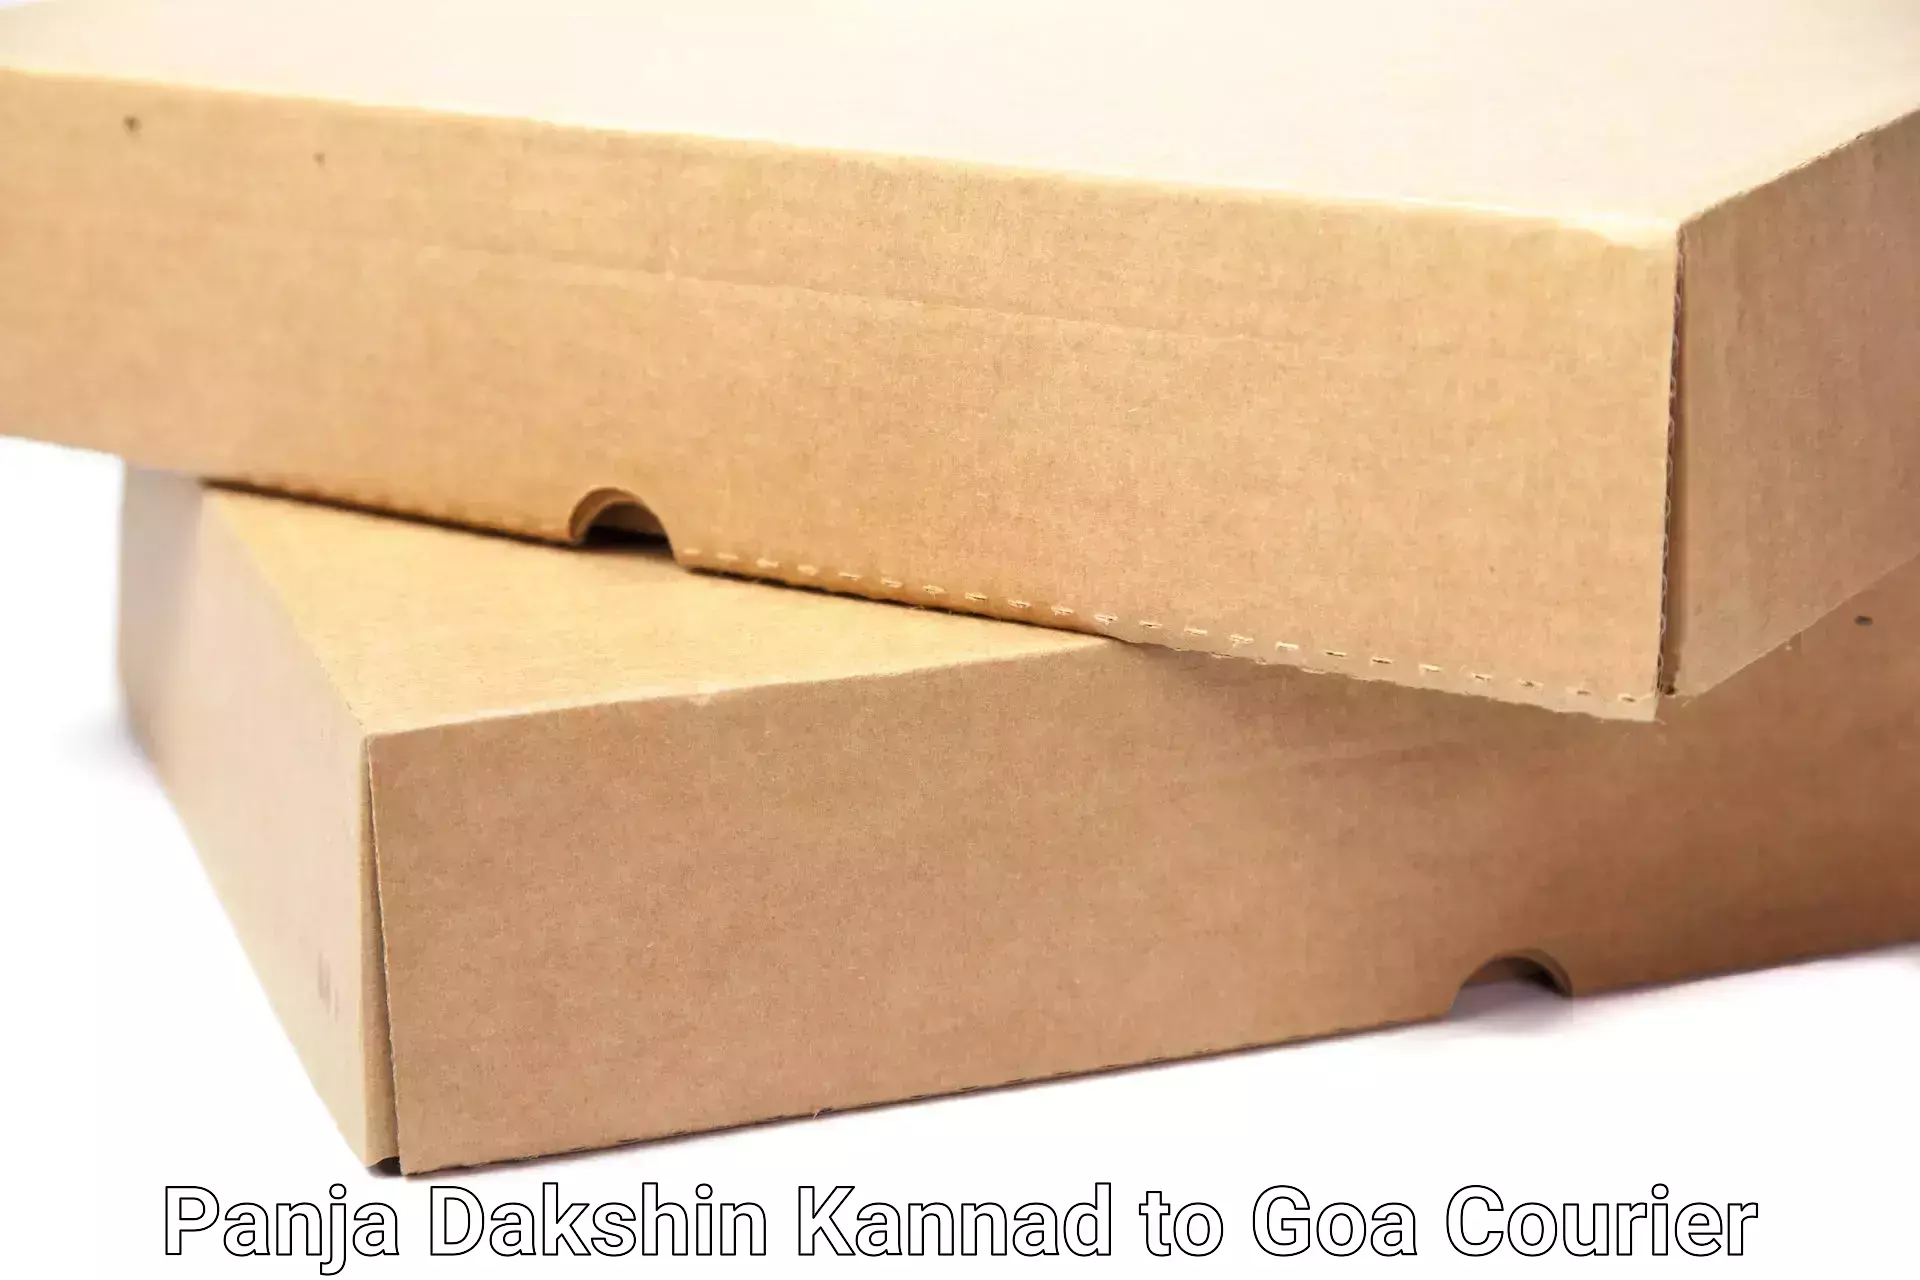 Efficient moving and packing in Panja Dakshin Kannad to South Goa